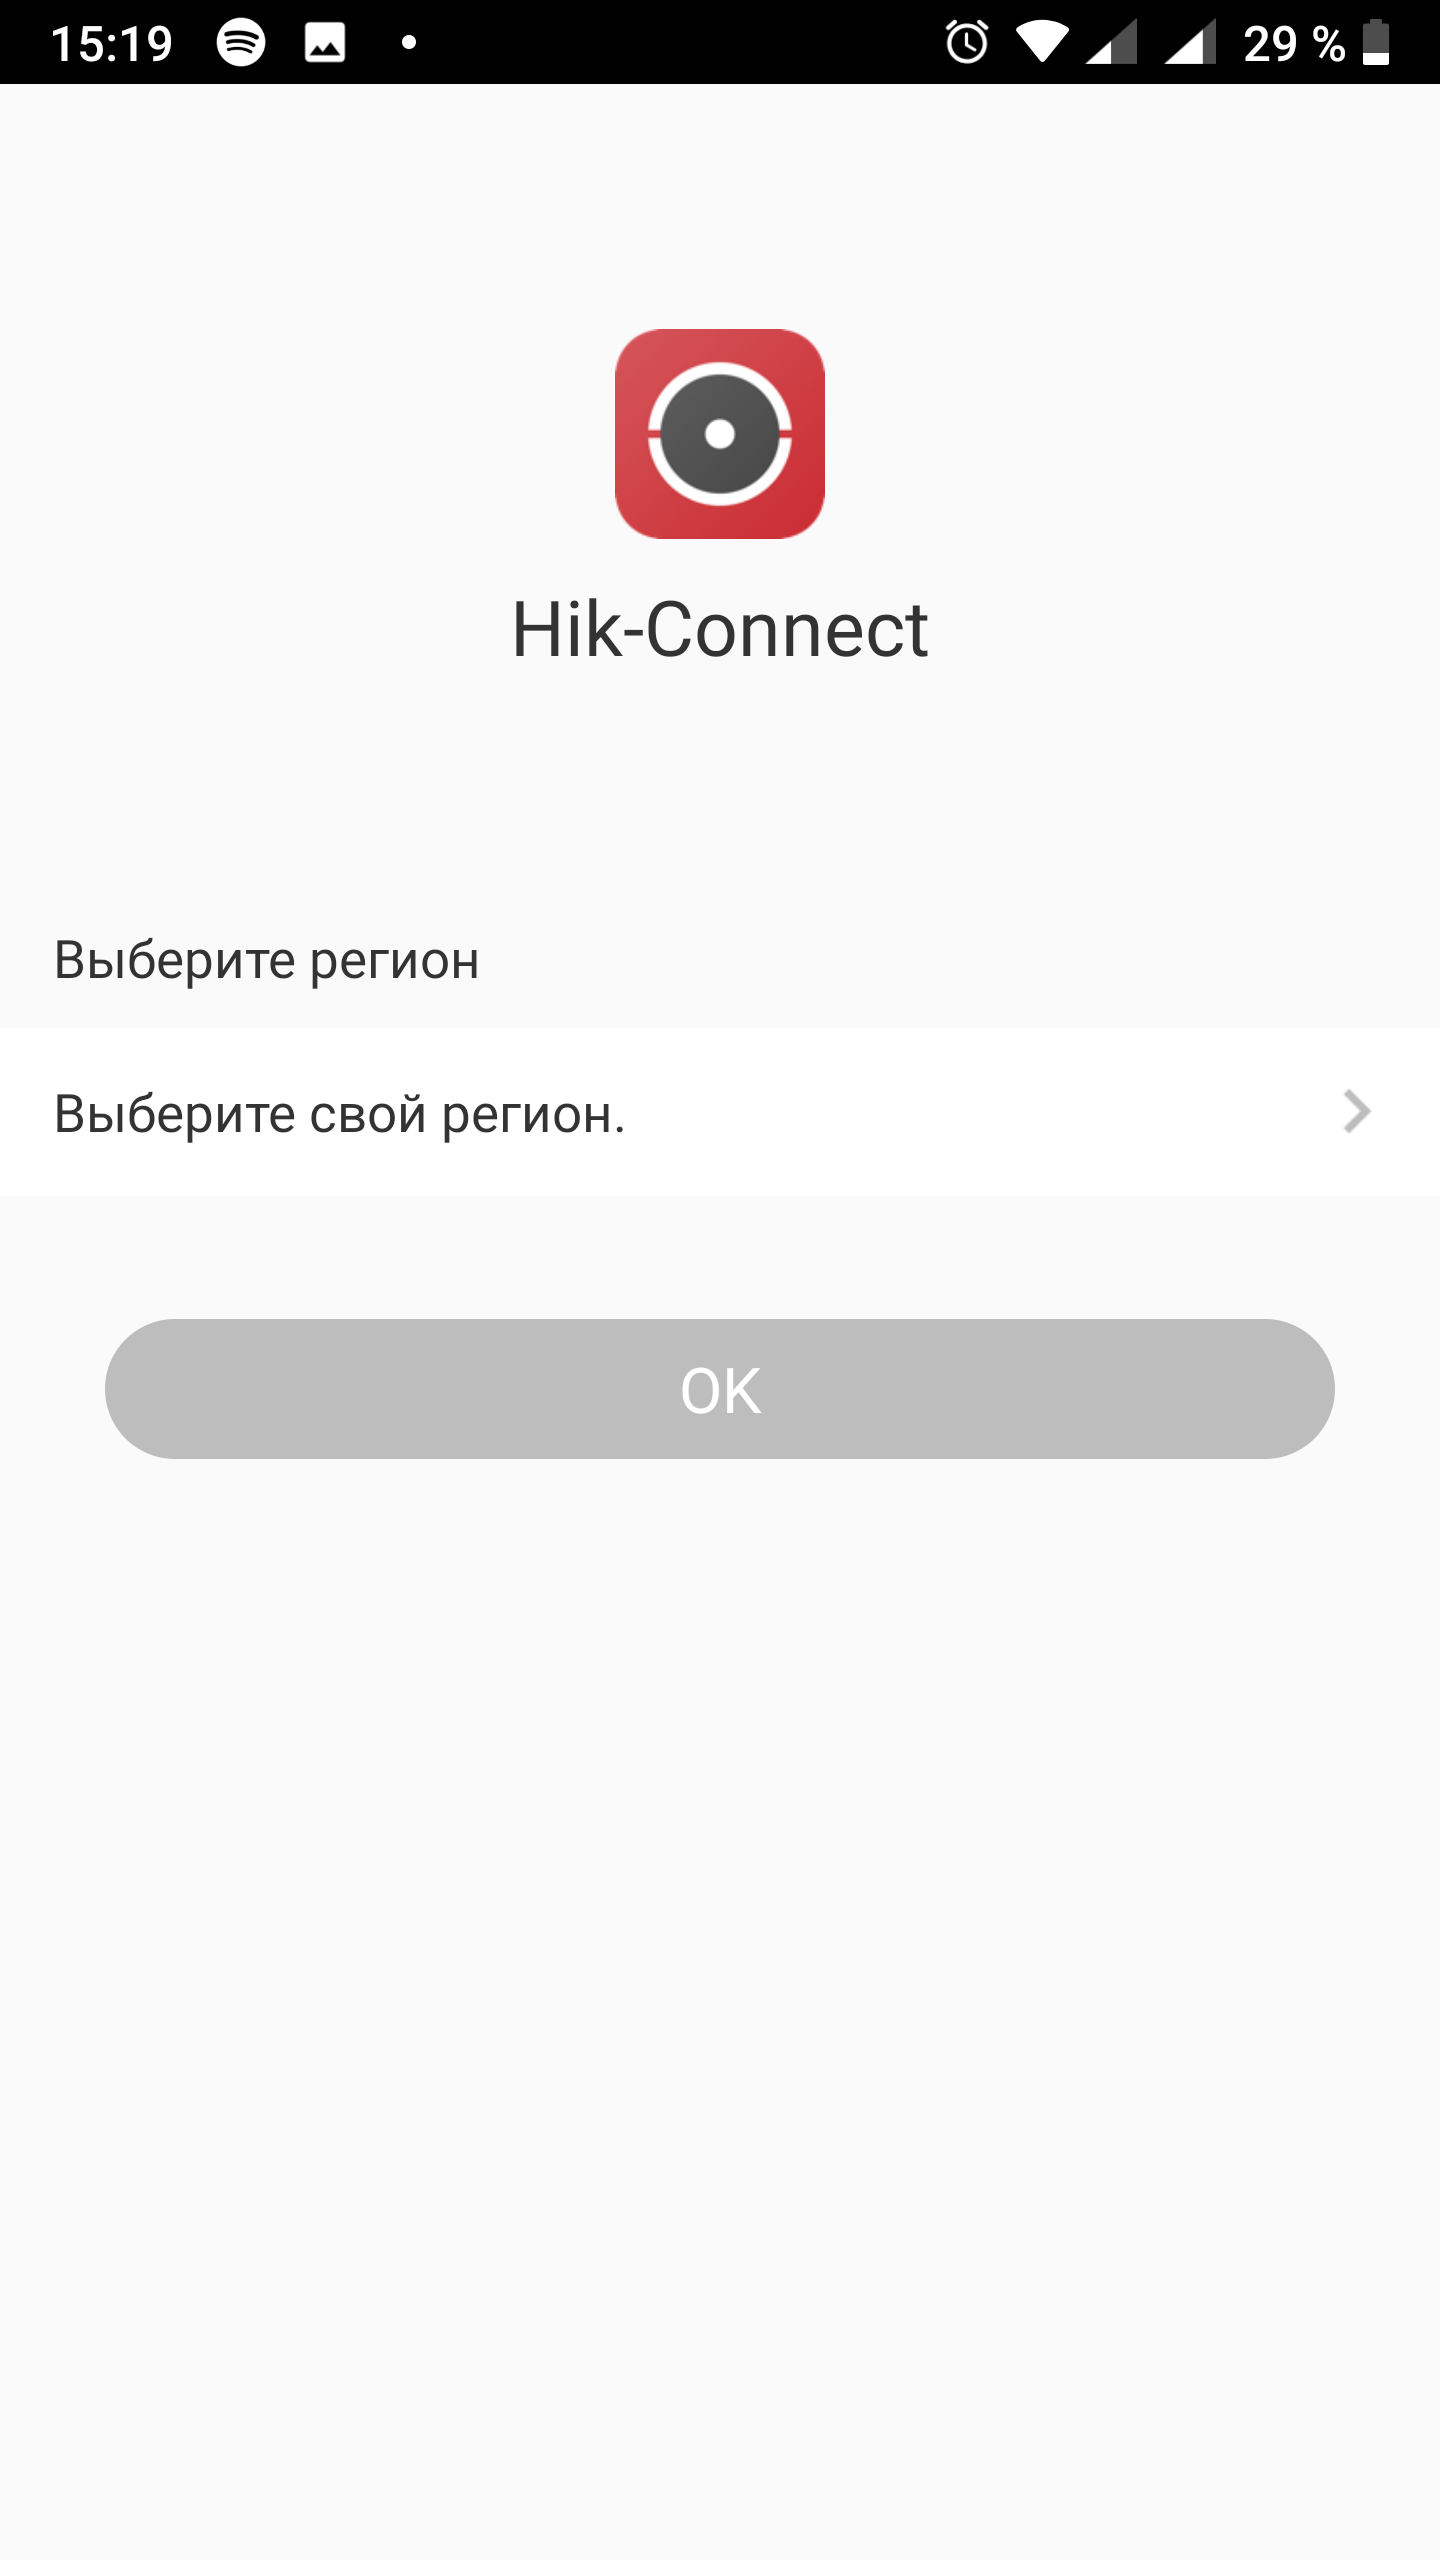 hik-connect-install-3.png